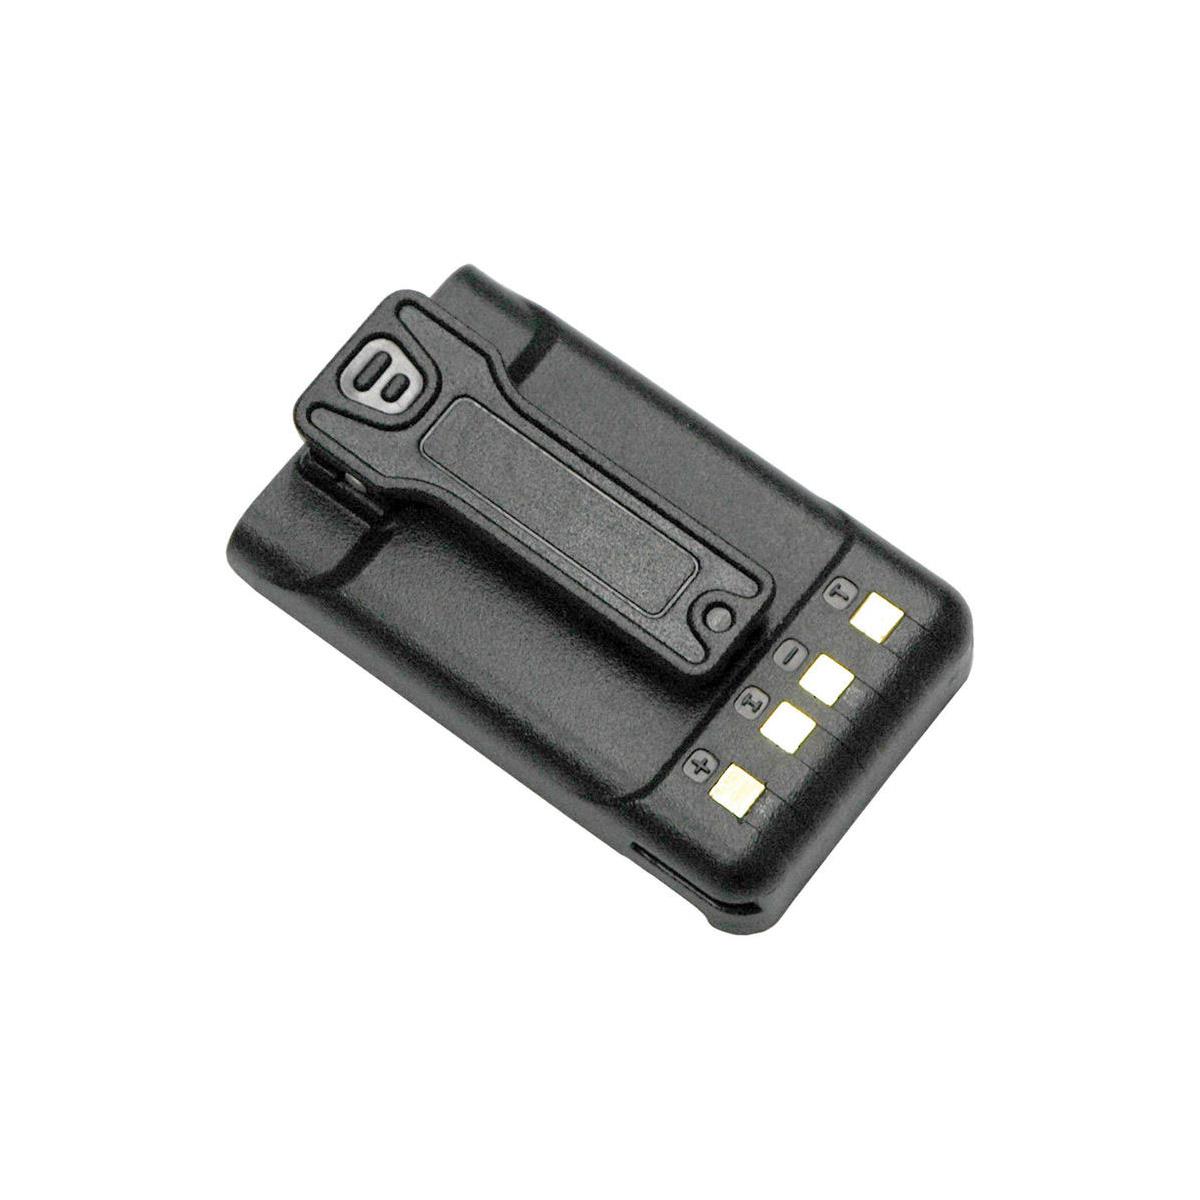 Image of Eartec SCLI800BAT Rechargeable Li-Ion Battery for SC-1000 Plus 2-Way Radio